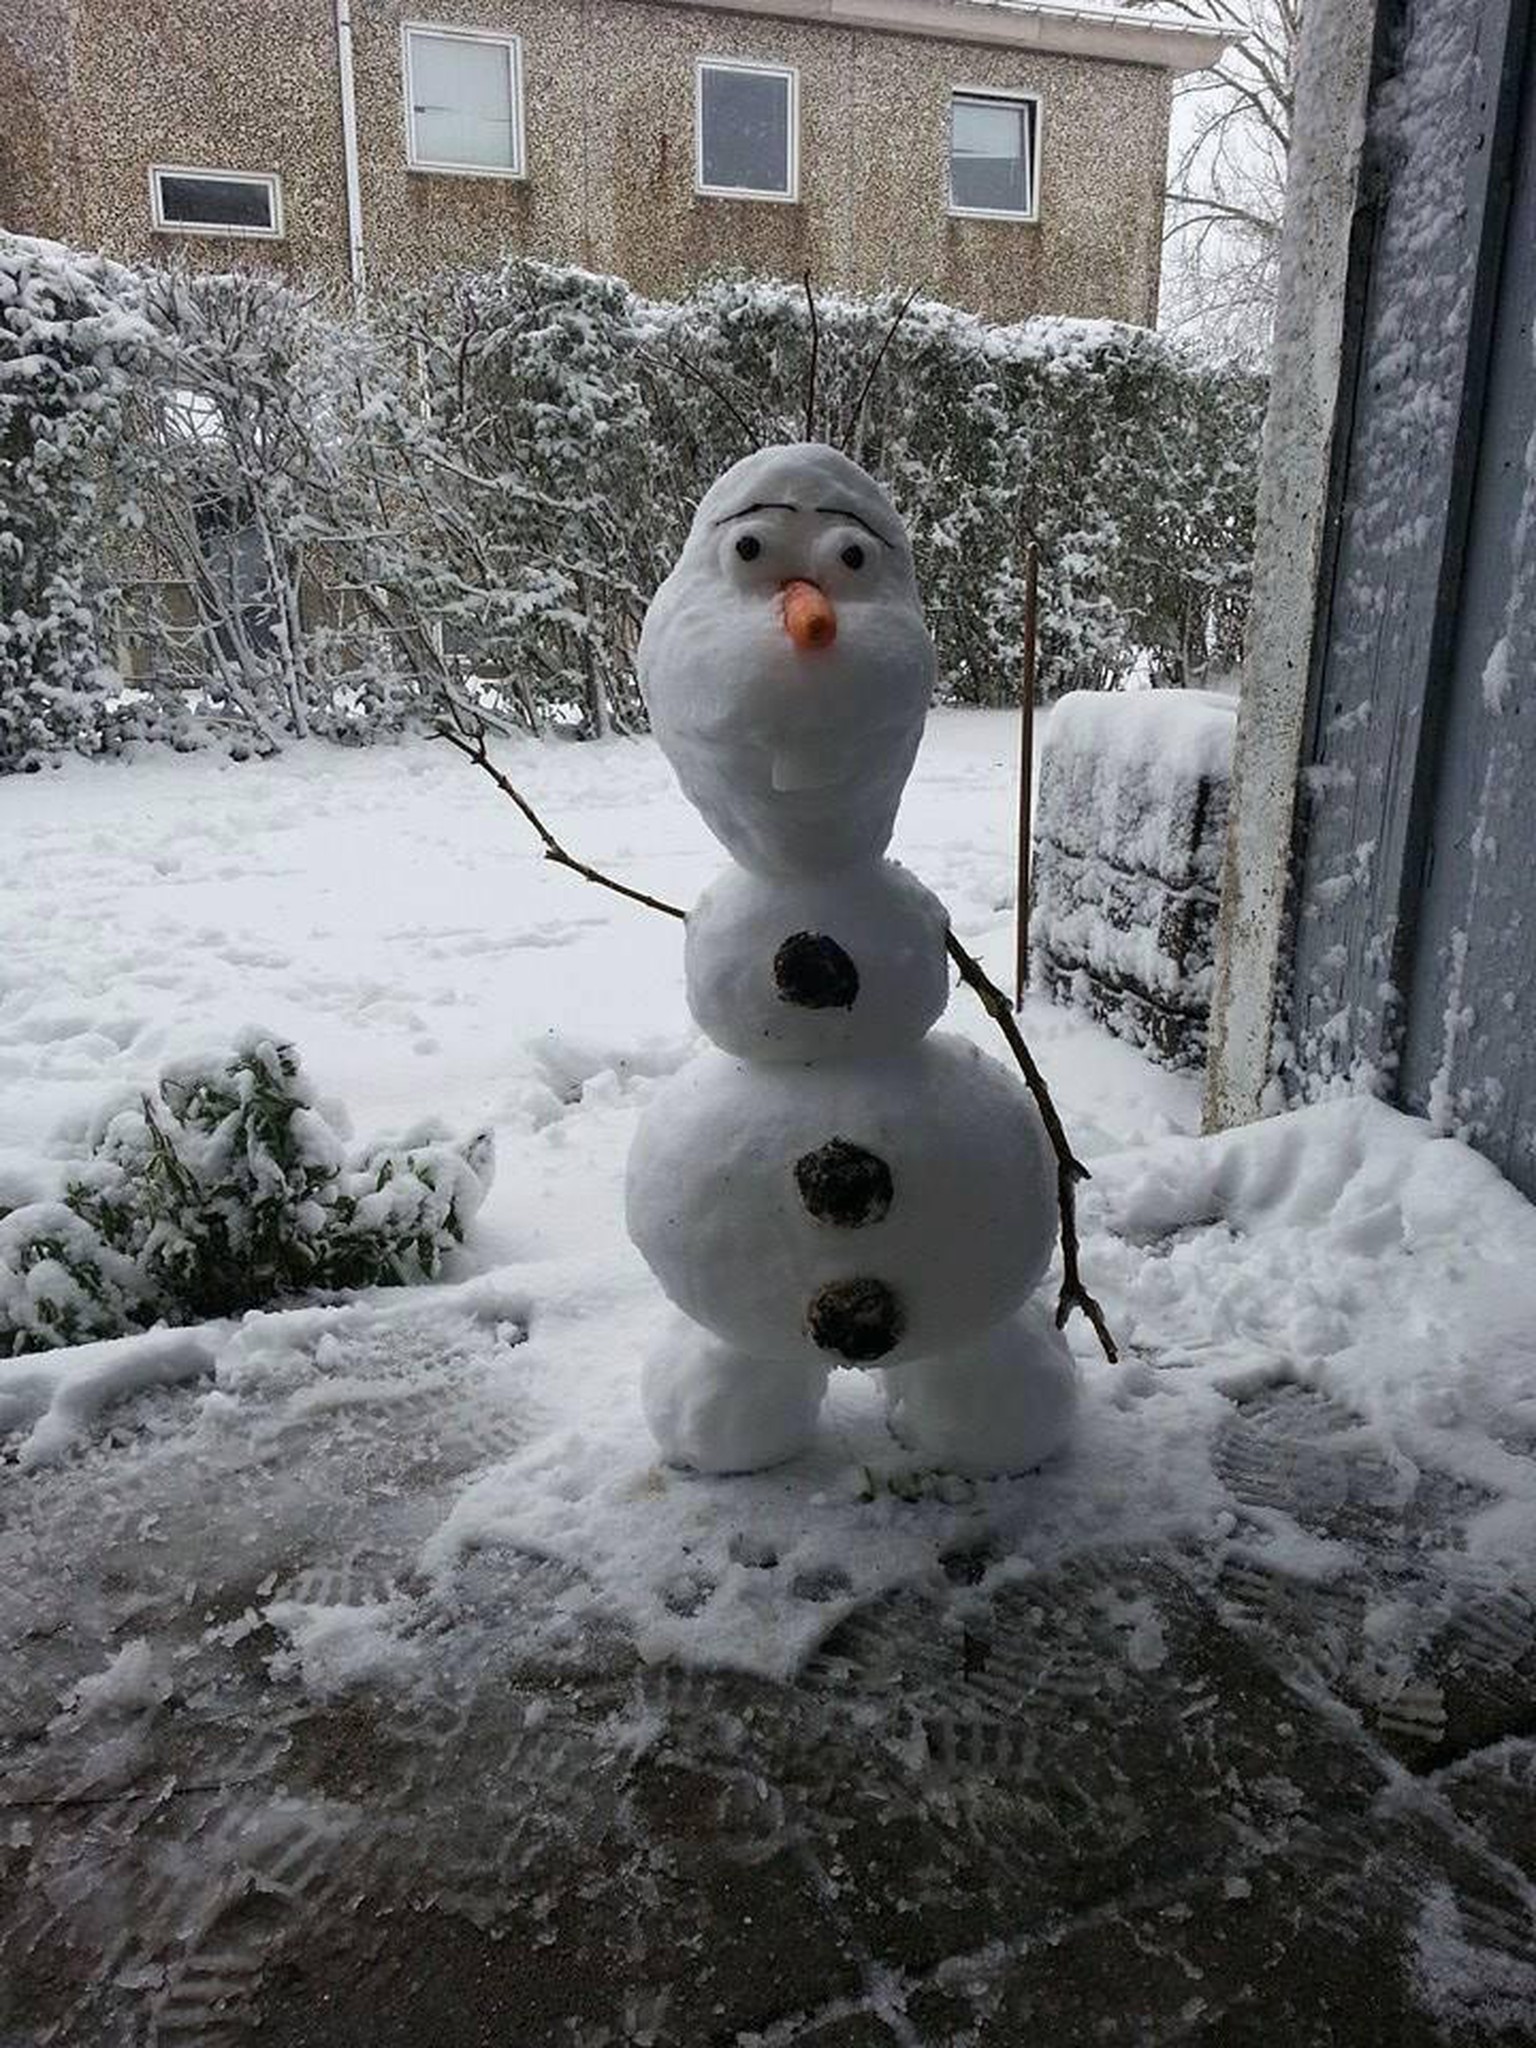 snow figure in the shape of Olaf the snowman from the movie Frozen